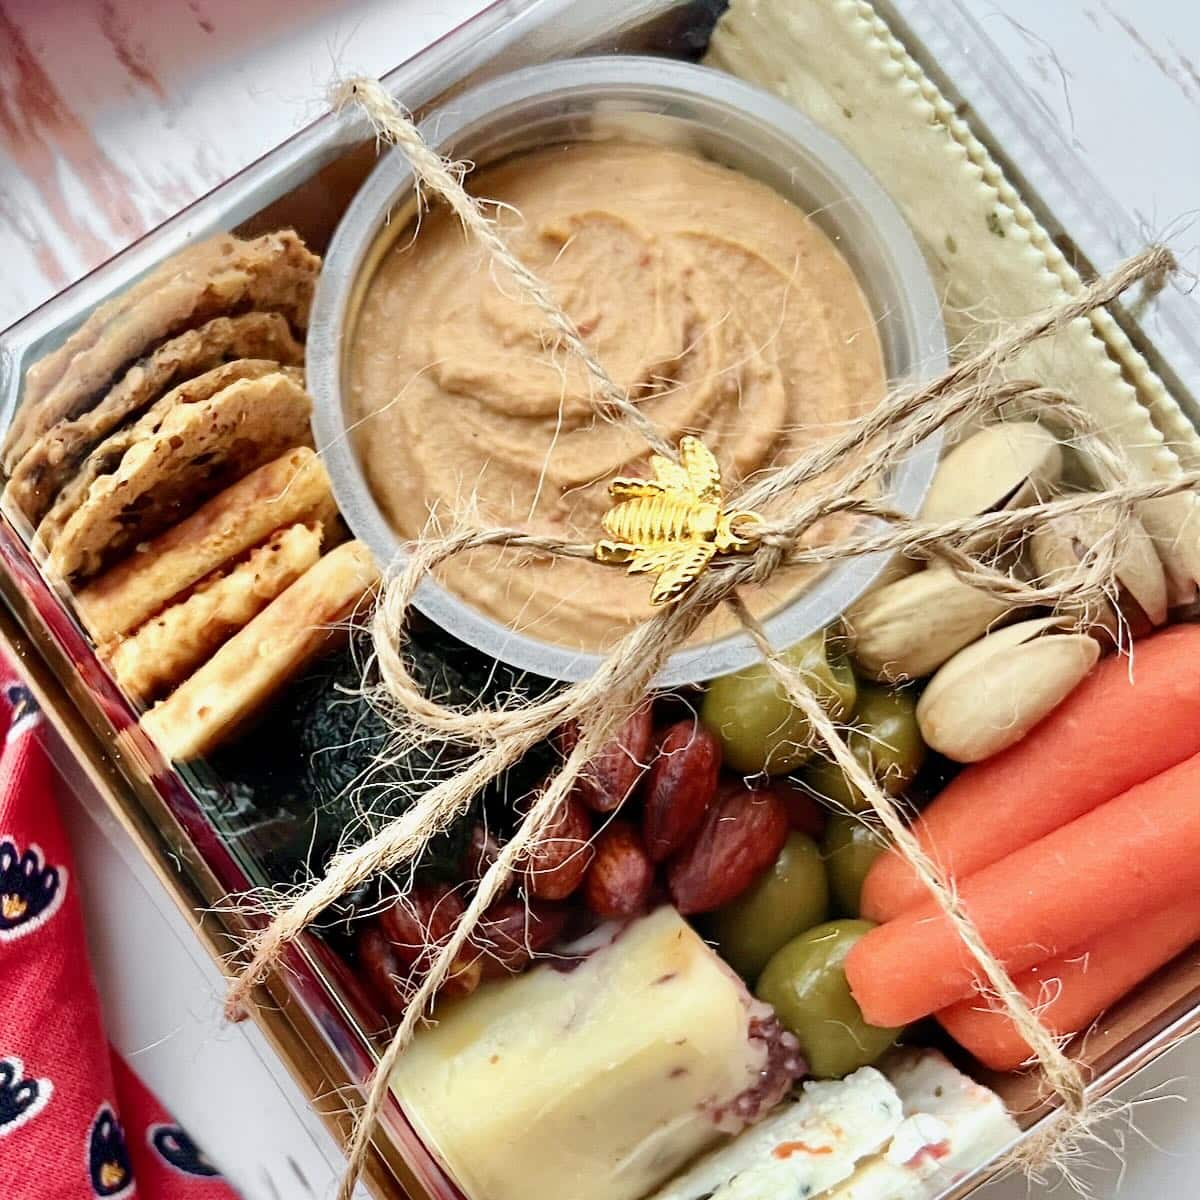 Open box of hummus, crackers, dates, pistachios, grapes, carrots and cheese tied up with jute twine.